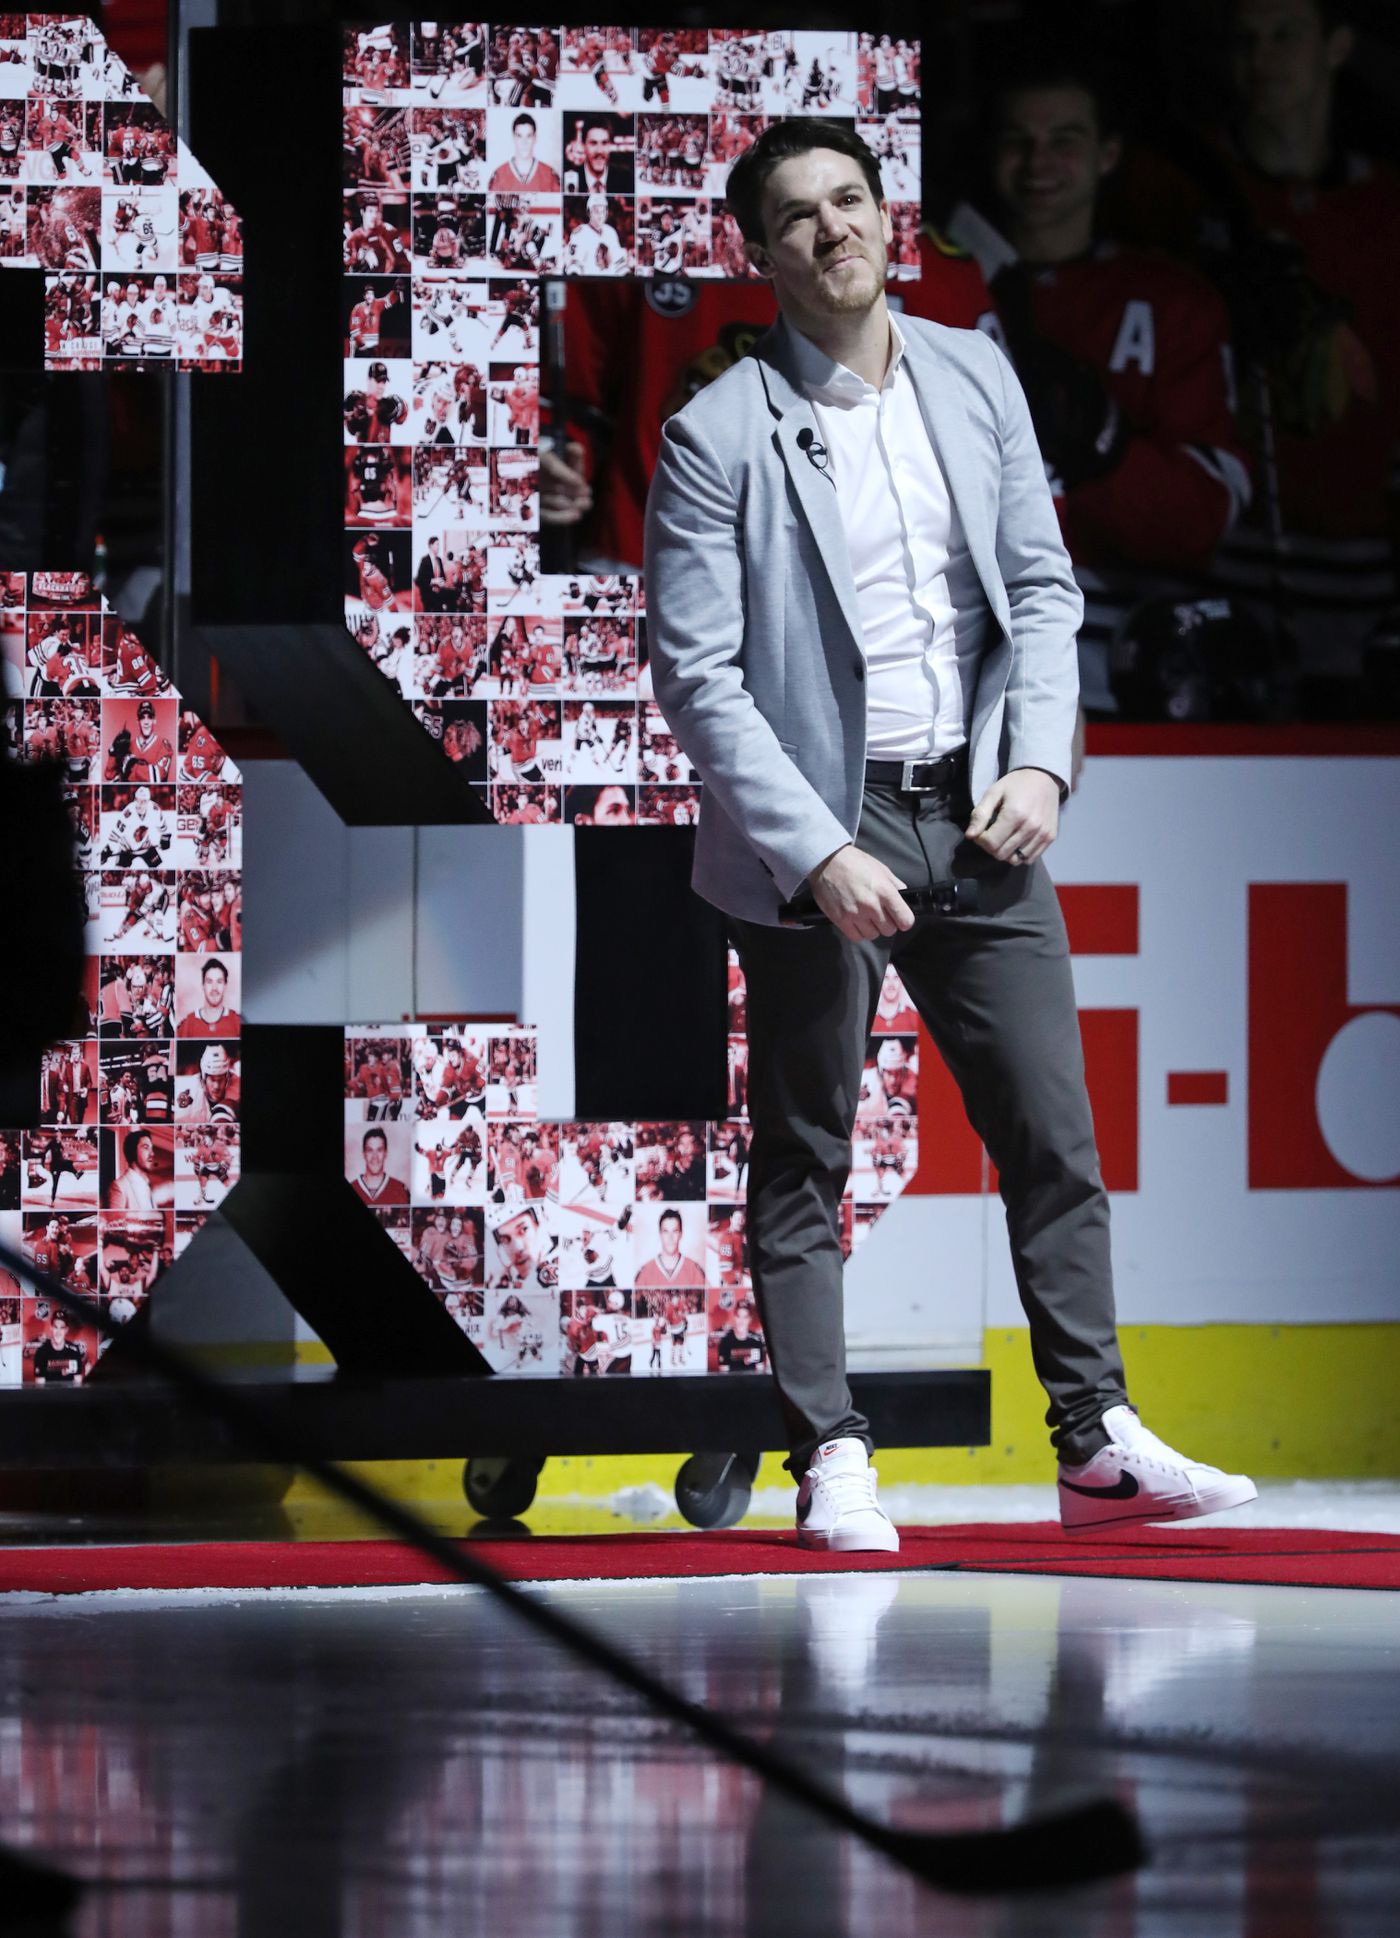 Former Chicago Blackhawks player Andrew Shaw is introduced for a pregame ceremony in his honor before a game between the Blackhawks and Montreal Canadiens at United Center on Jan. 13, 2022, in Chicago.